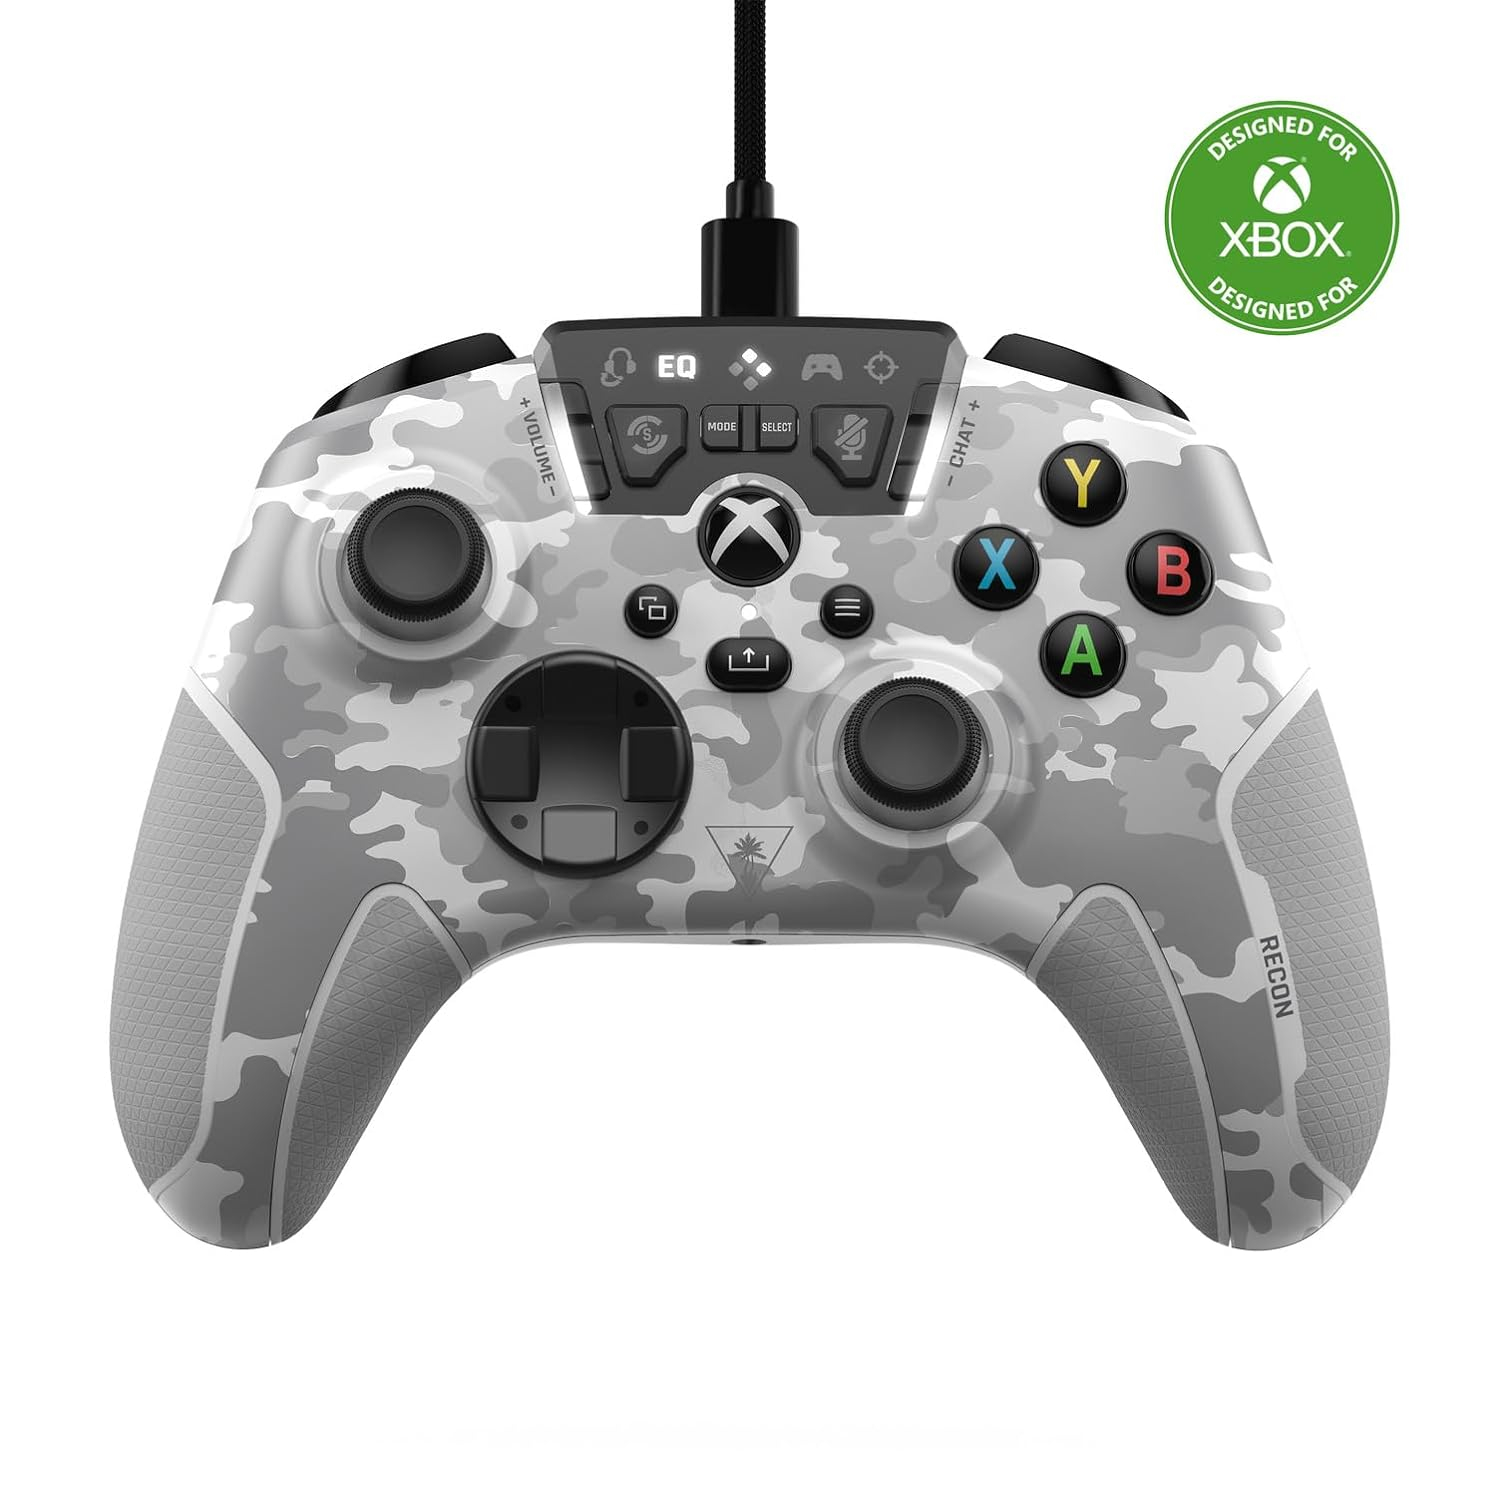  The Turtle Beach Recon Xbox controller has had its price slashed, and is ideal for voice chat with friends online